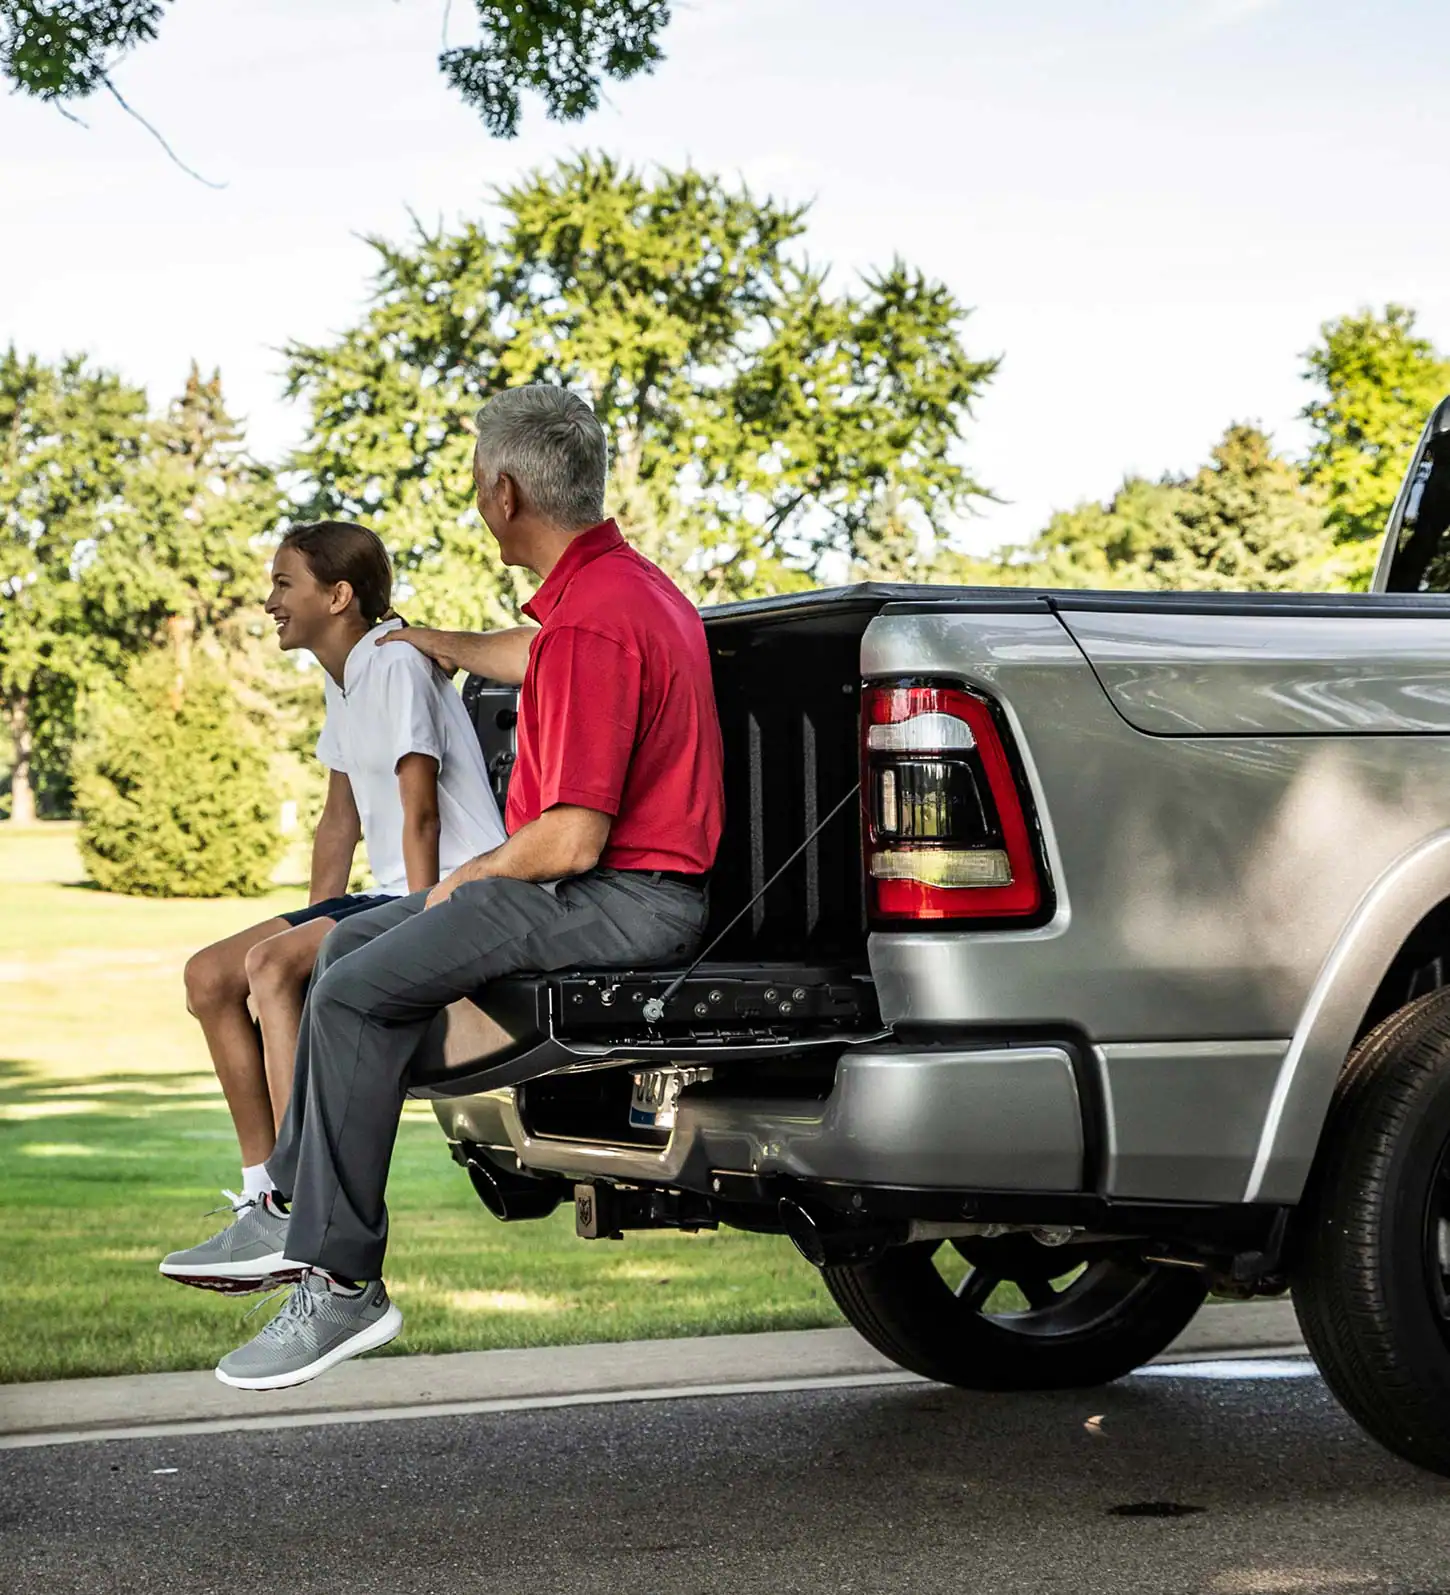 2023 RAM 1500 multifunction tailgate holds up to 2,000 lbs